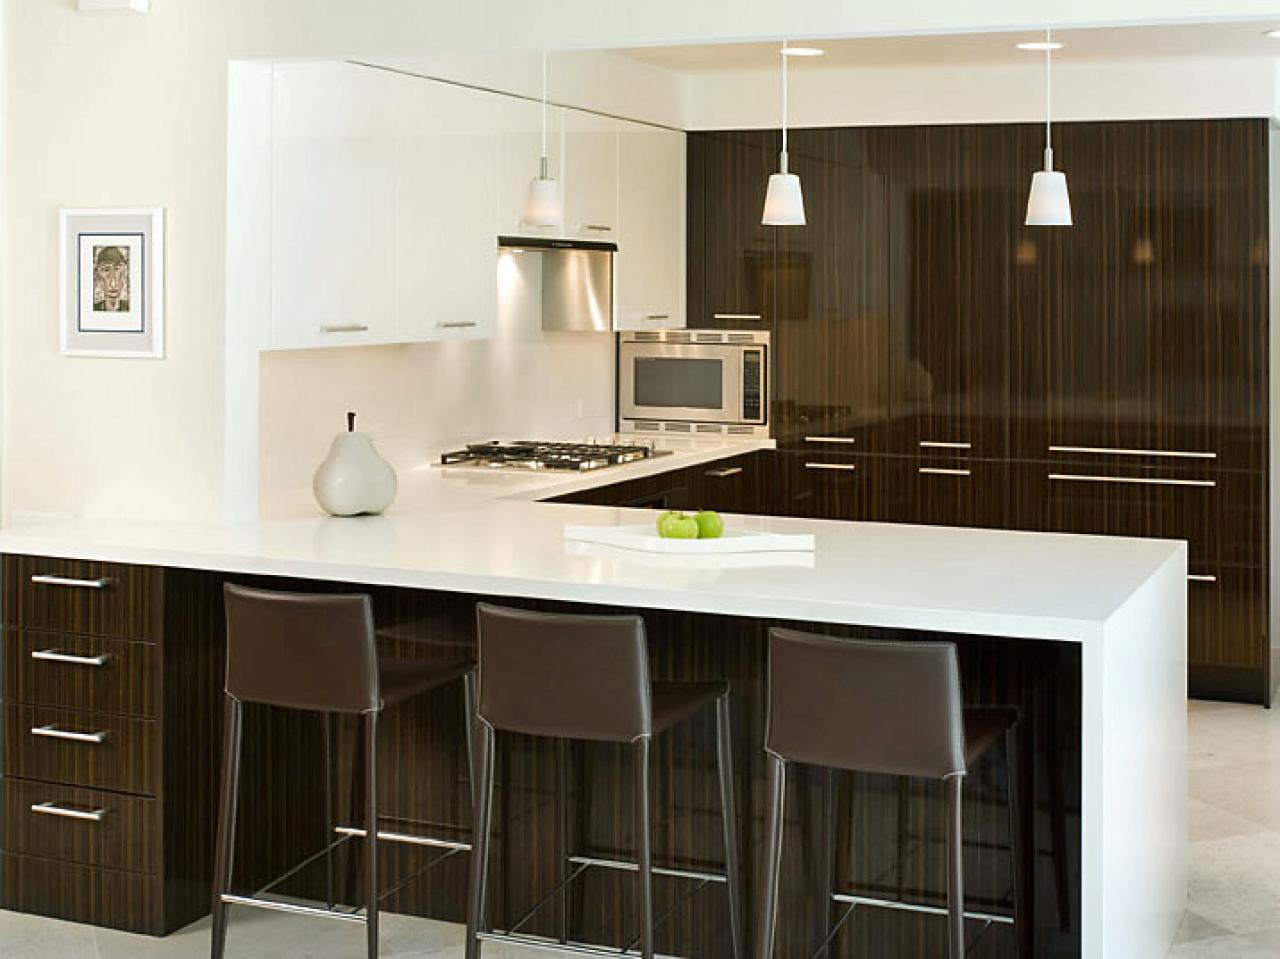 Peninsula Kitchen Design: Pictures, Ideas & Tips From HGTV ...